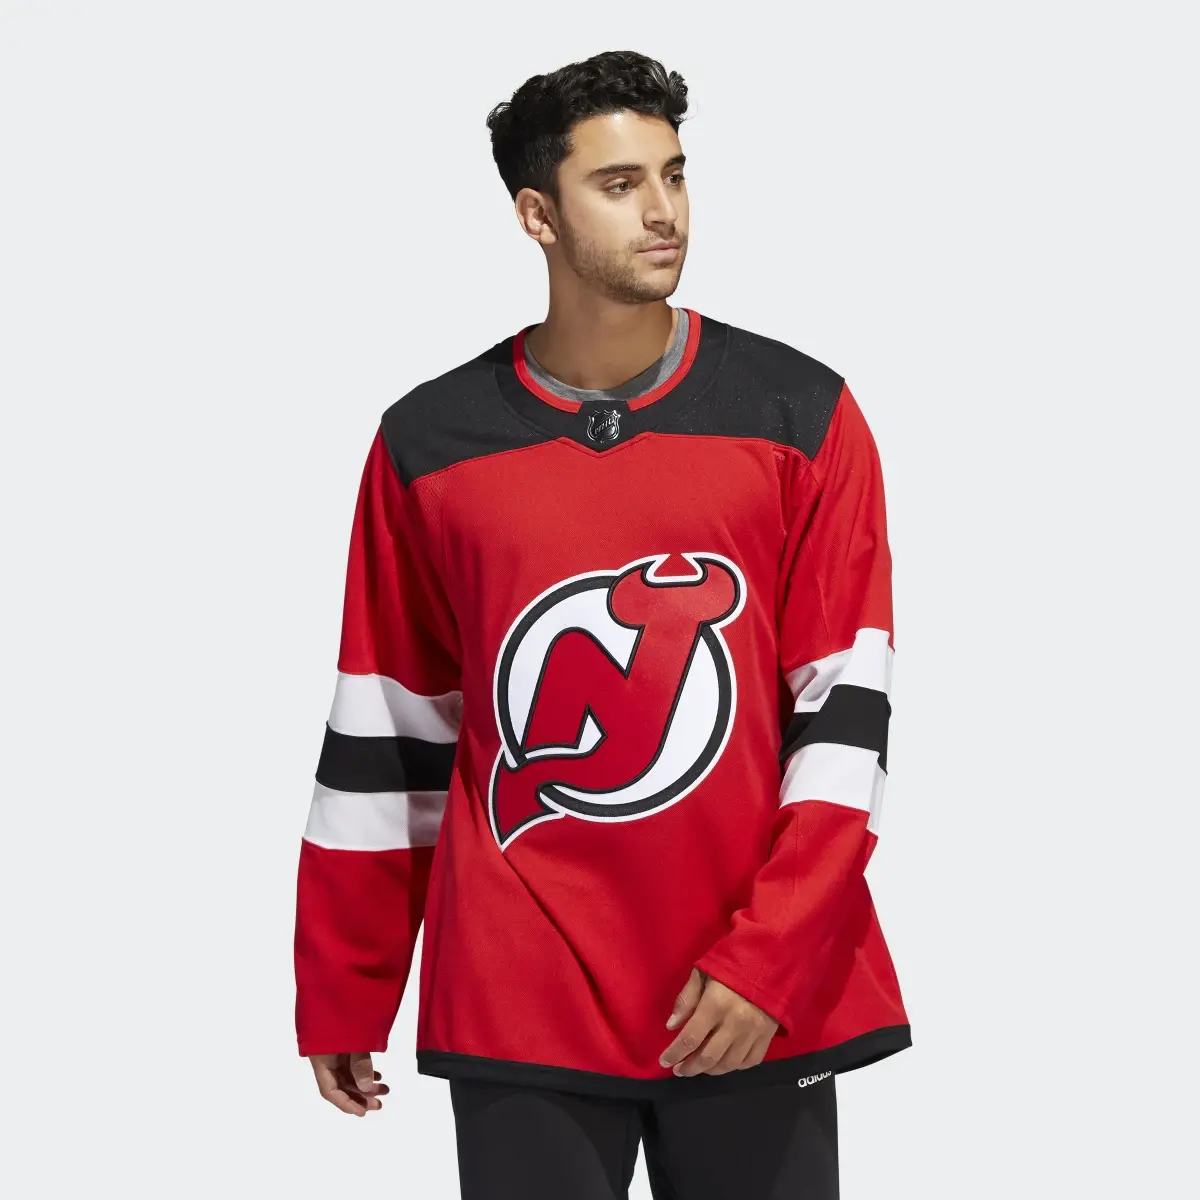 Adidas Devils Home Authentic Jersey. 2